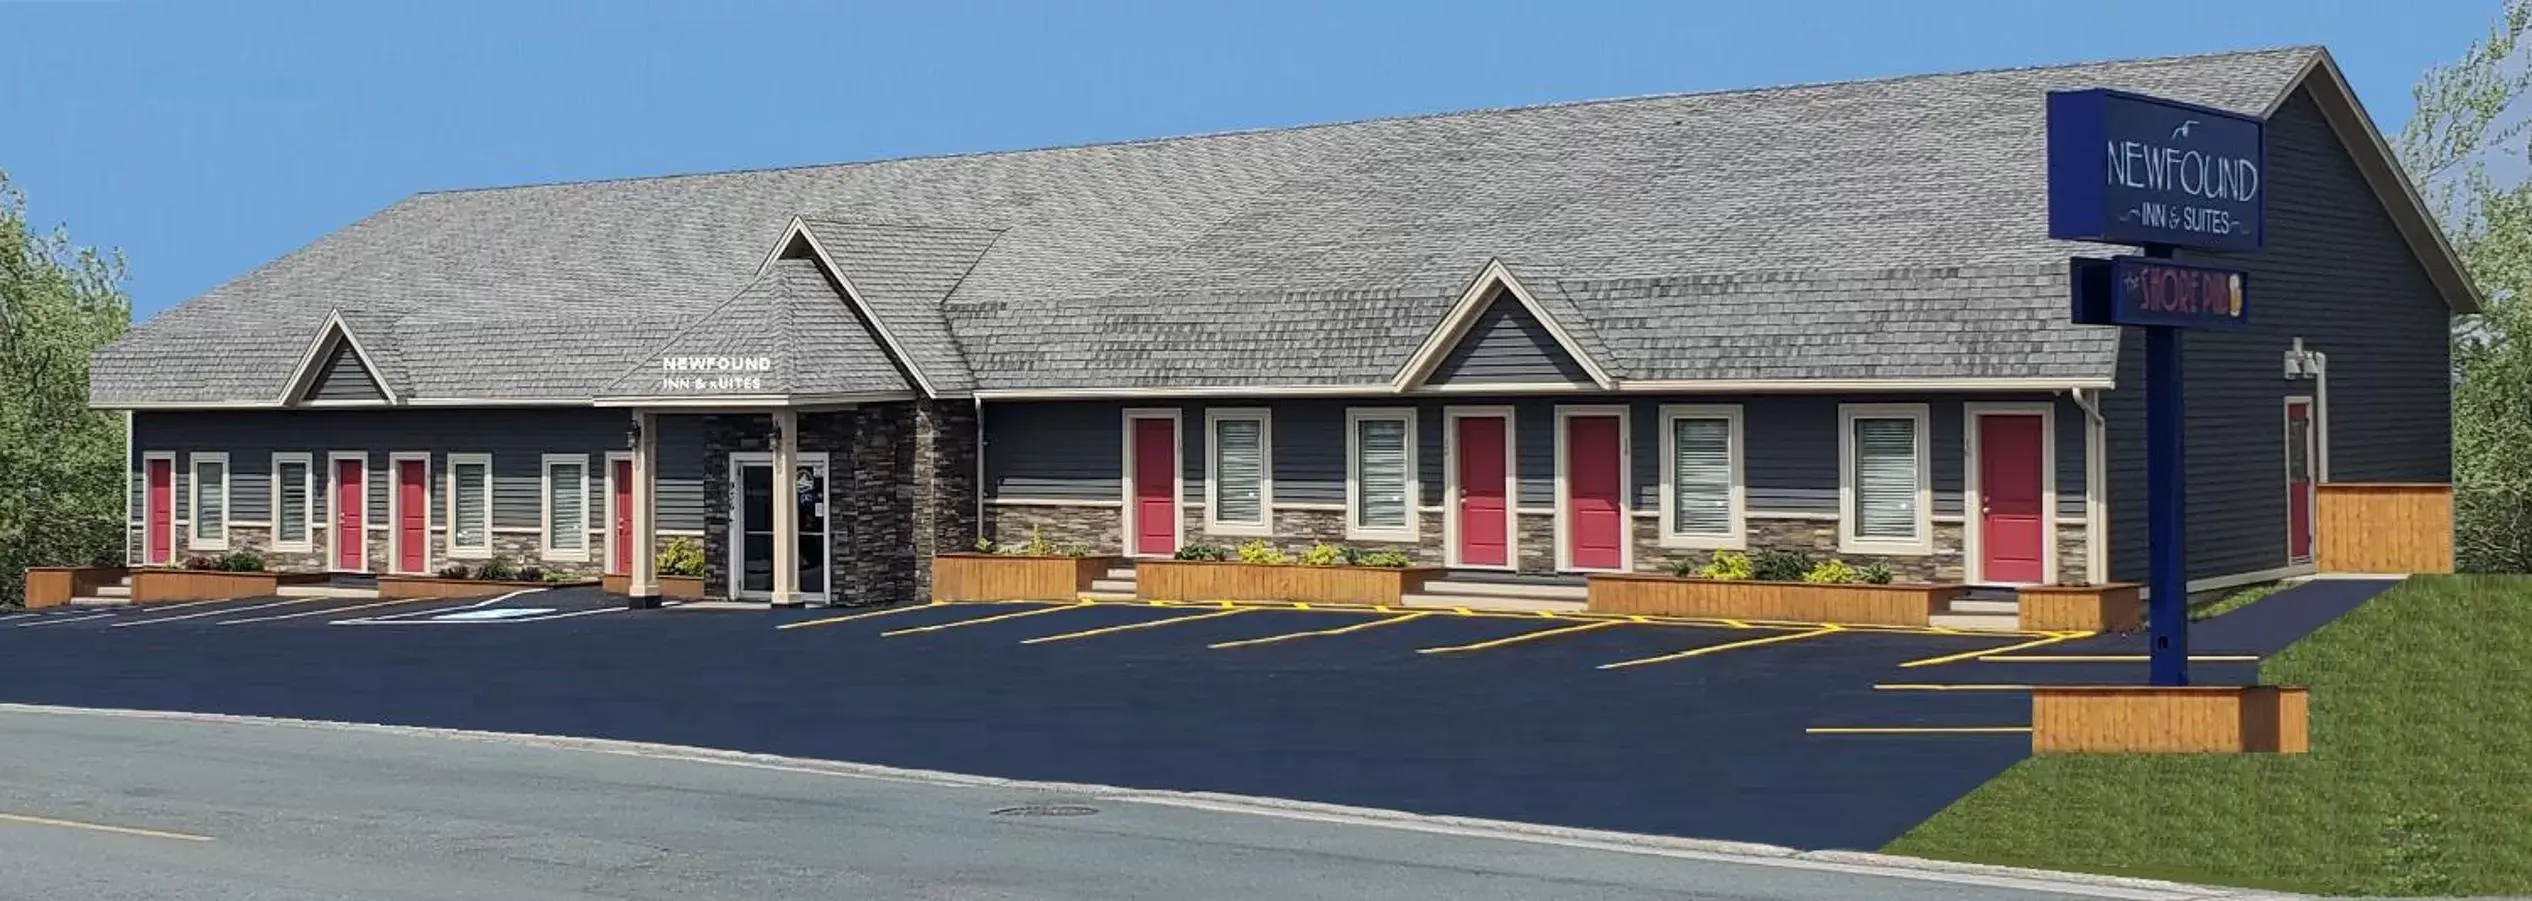 Property Building in Newfound Inn & Suites